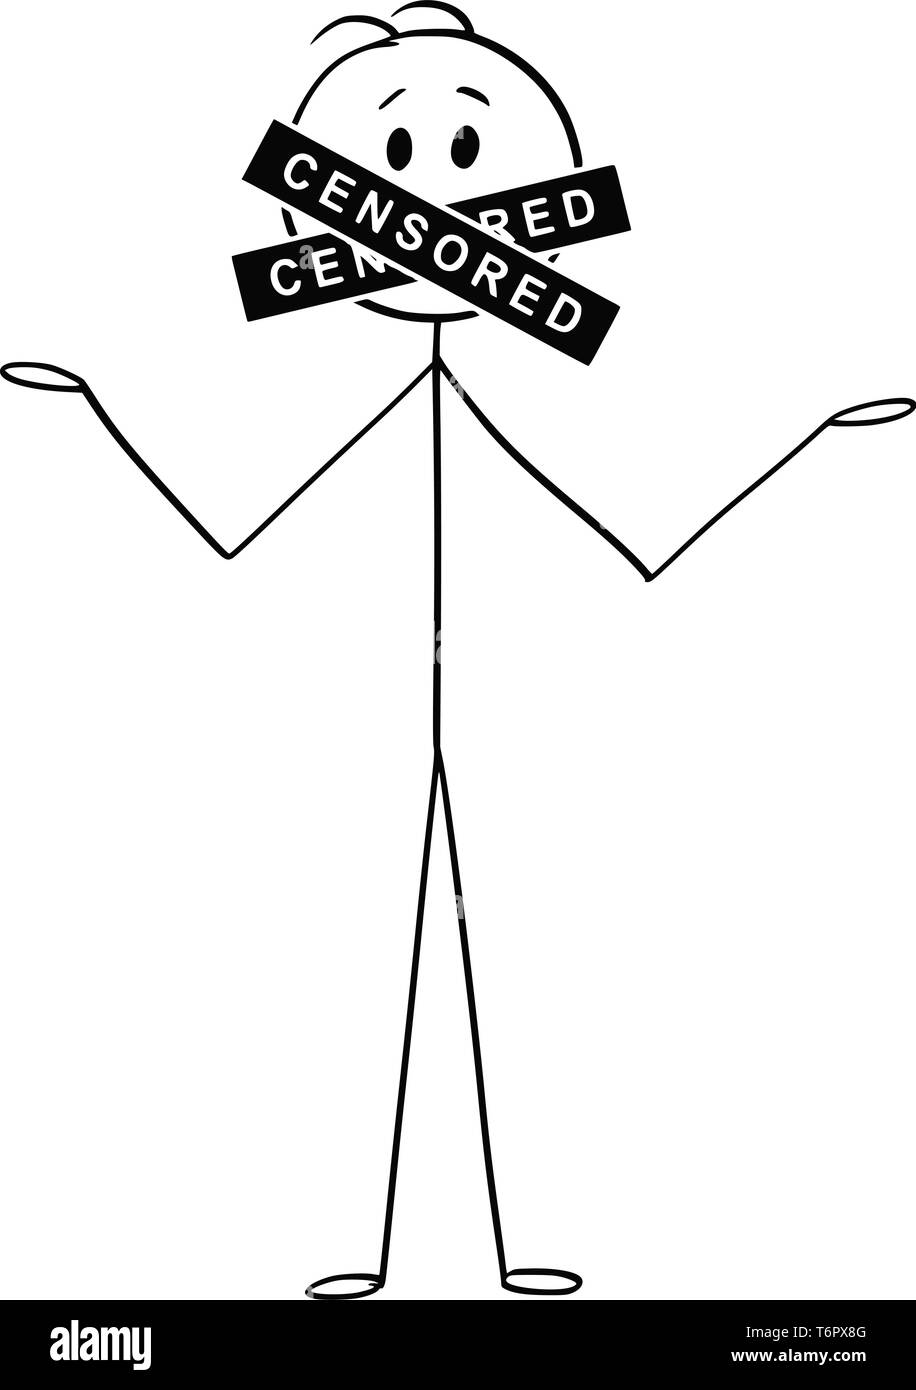 Cartoon stick figure drawing conceptual illustration of talking man with censored bar or sign covering his mouth. Concept of freedom of speech and censure. Stock Vector